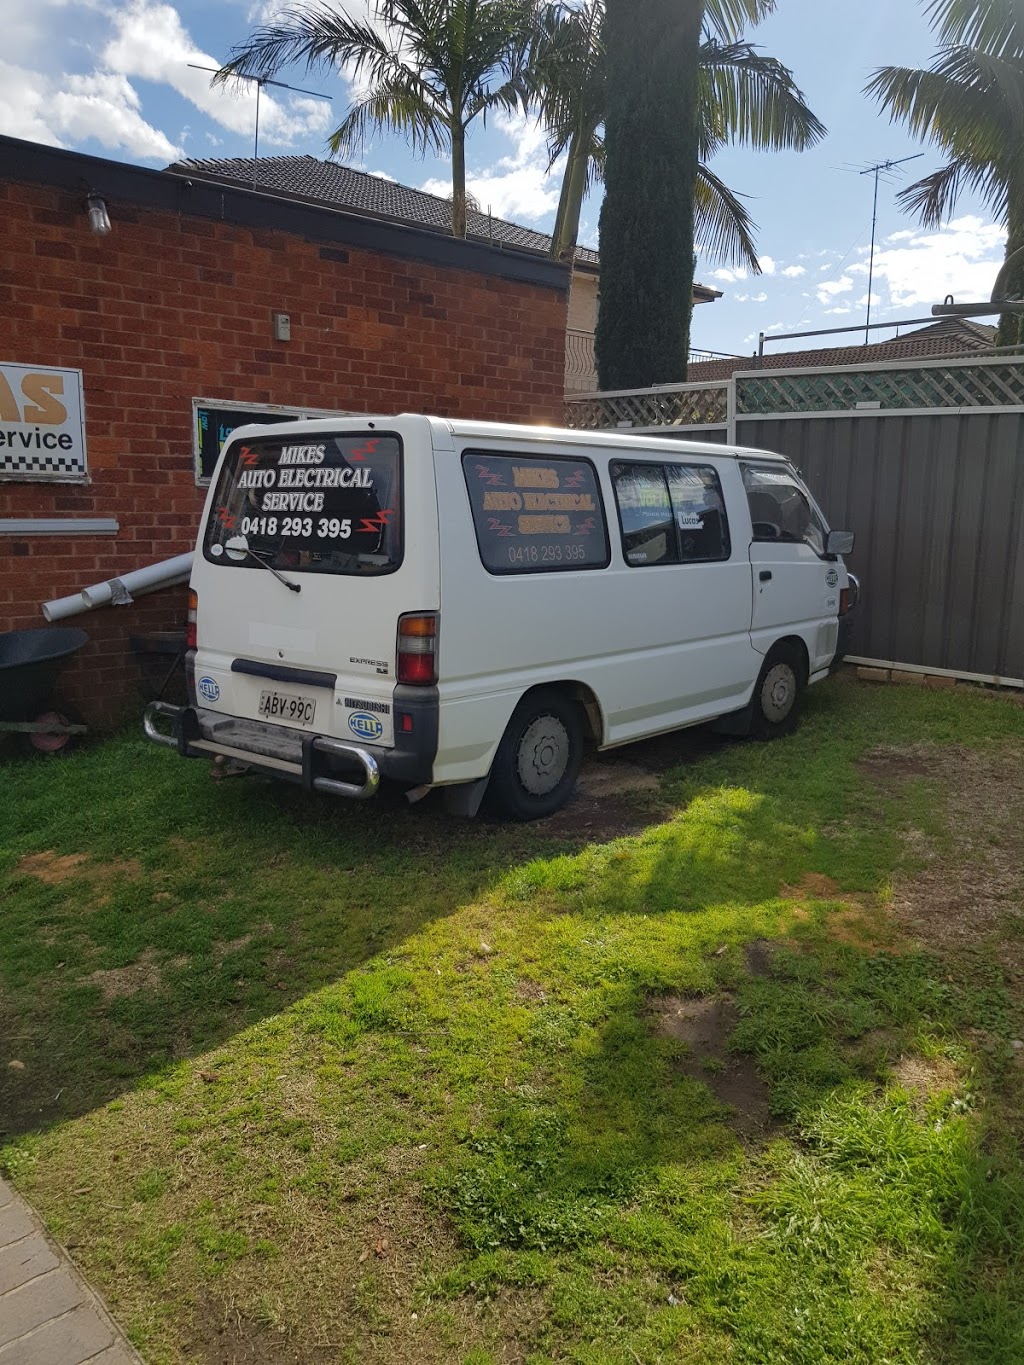 Mikes auto electrical service | car repair | 275 Johnston Rd, Bass Hill NSW 2197, Australia | 0418293395 OR +61 418 293 395